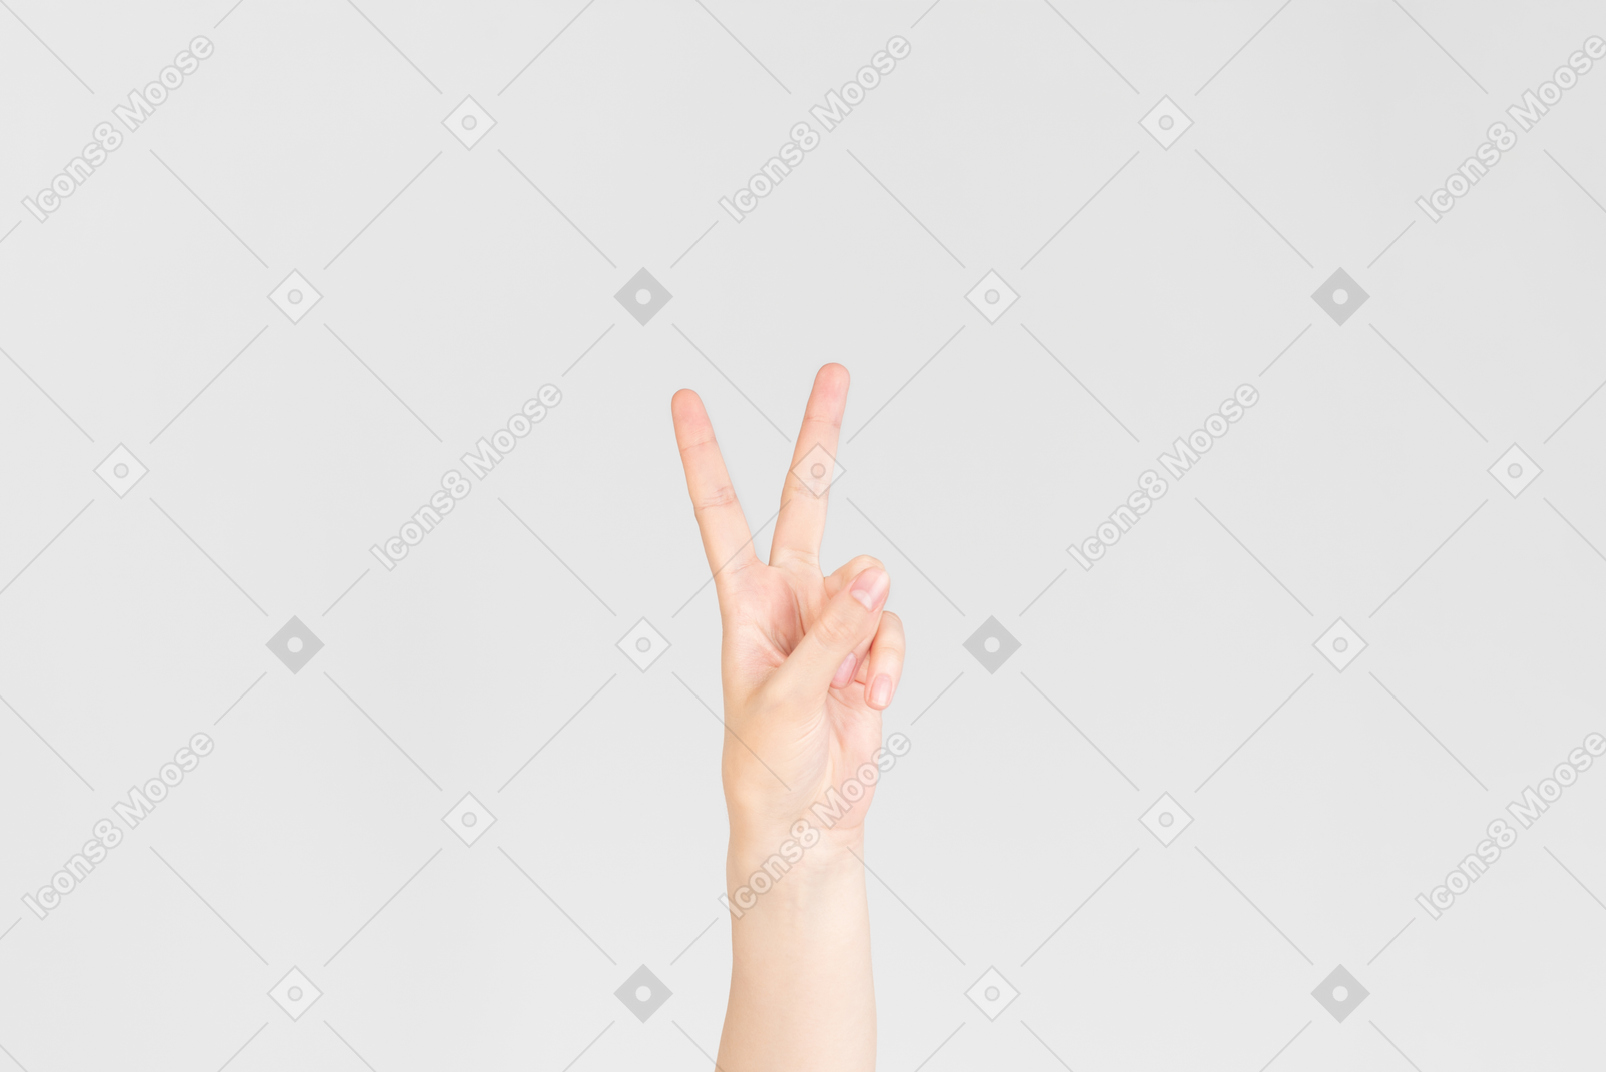 Female hand showing victory gesture